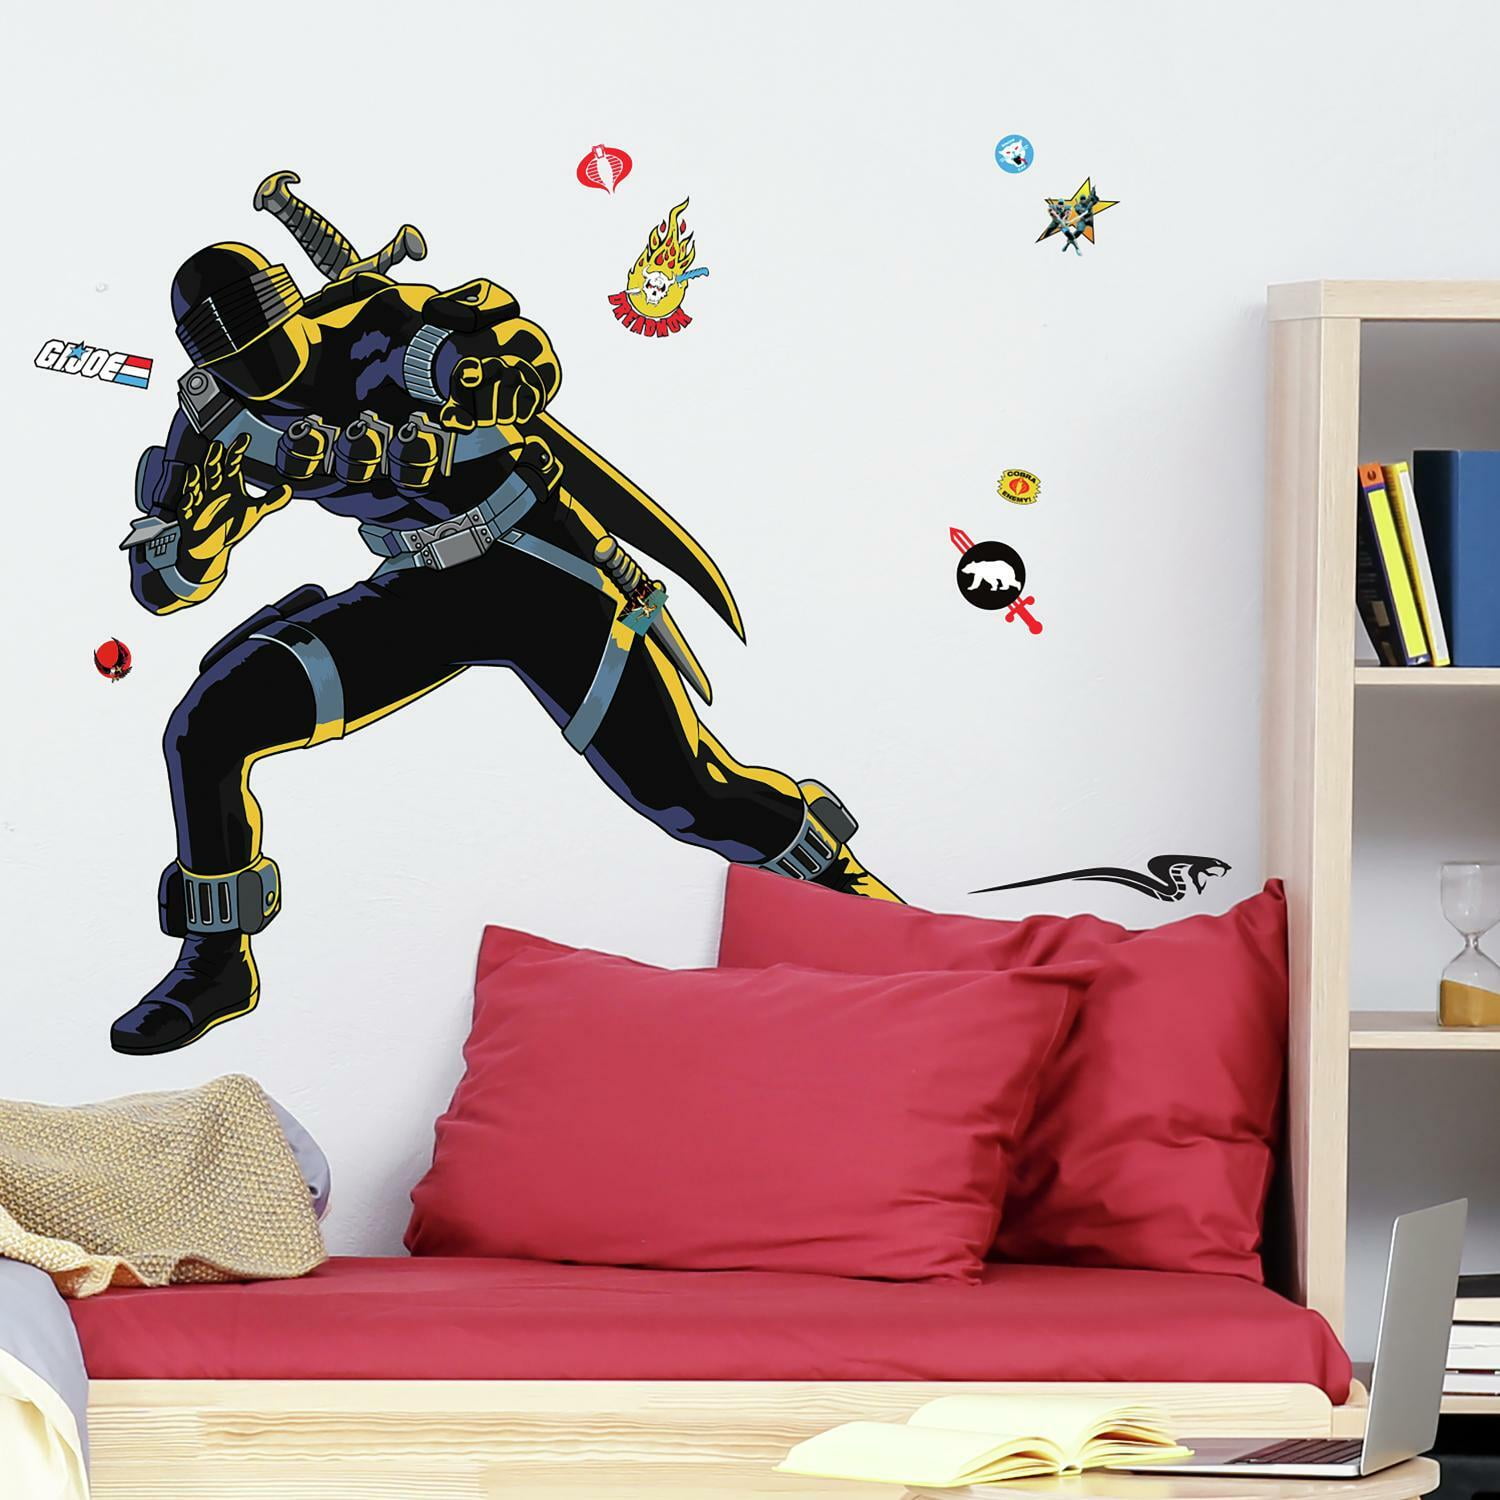 G I Joe Retro Peel & Stick 12 Licensed Wall Decals Removable Kids Room Stickers 